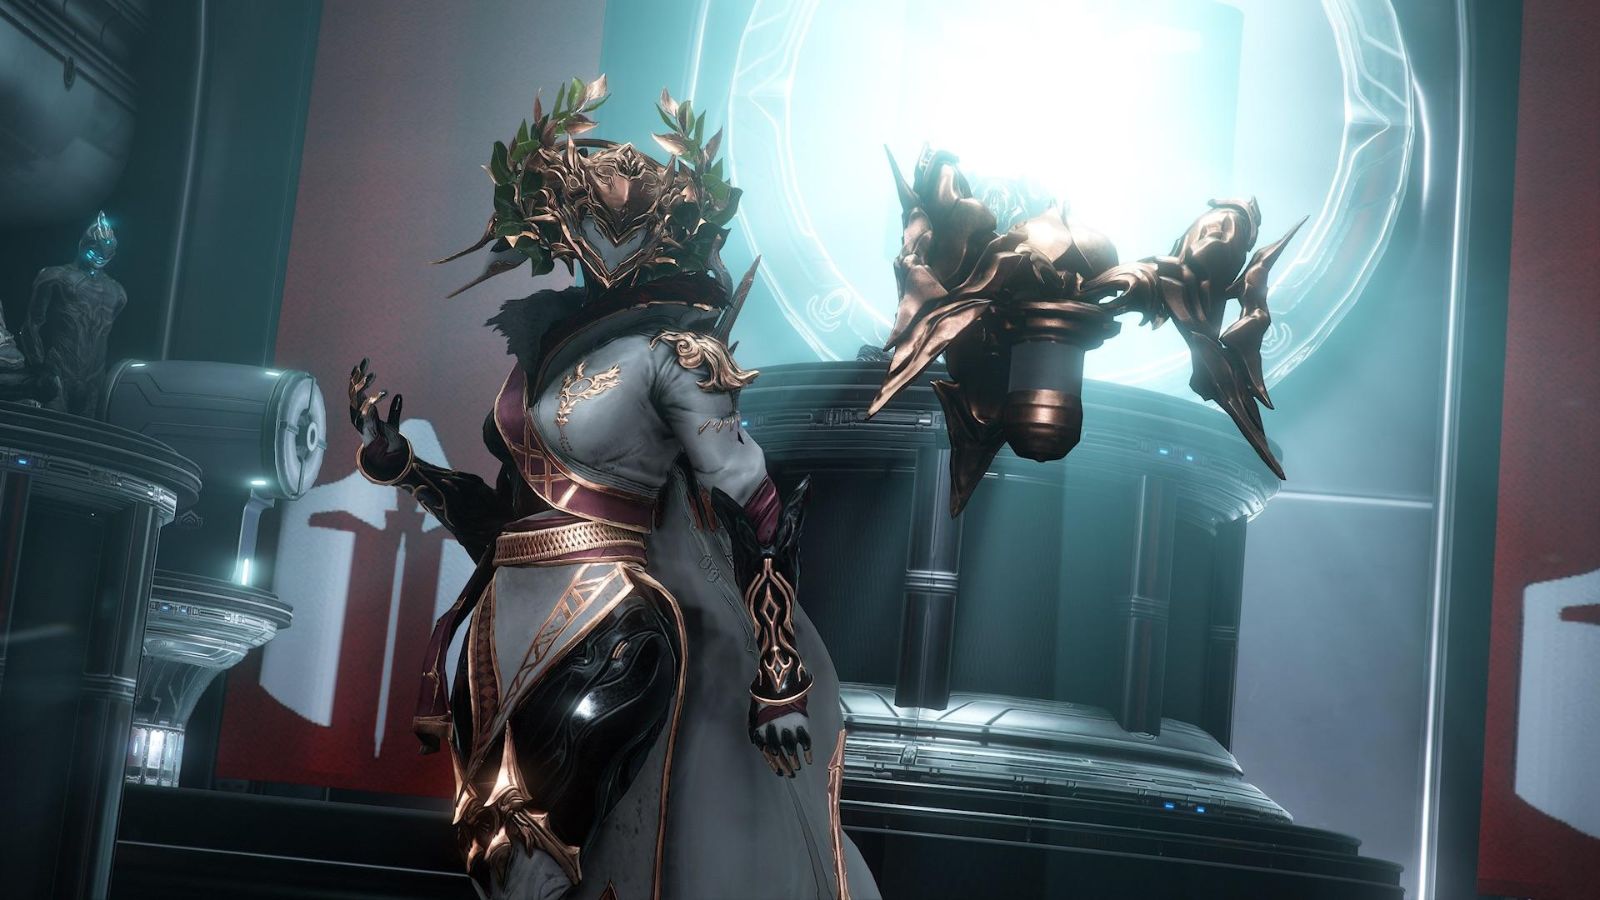 The Protea Warframe with her deluxe skin in the Arbiters of Hexis syndicate room in Captura mode